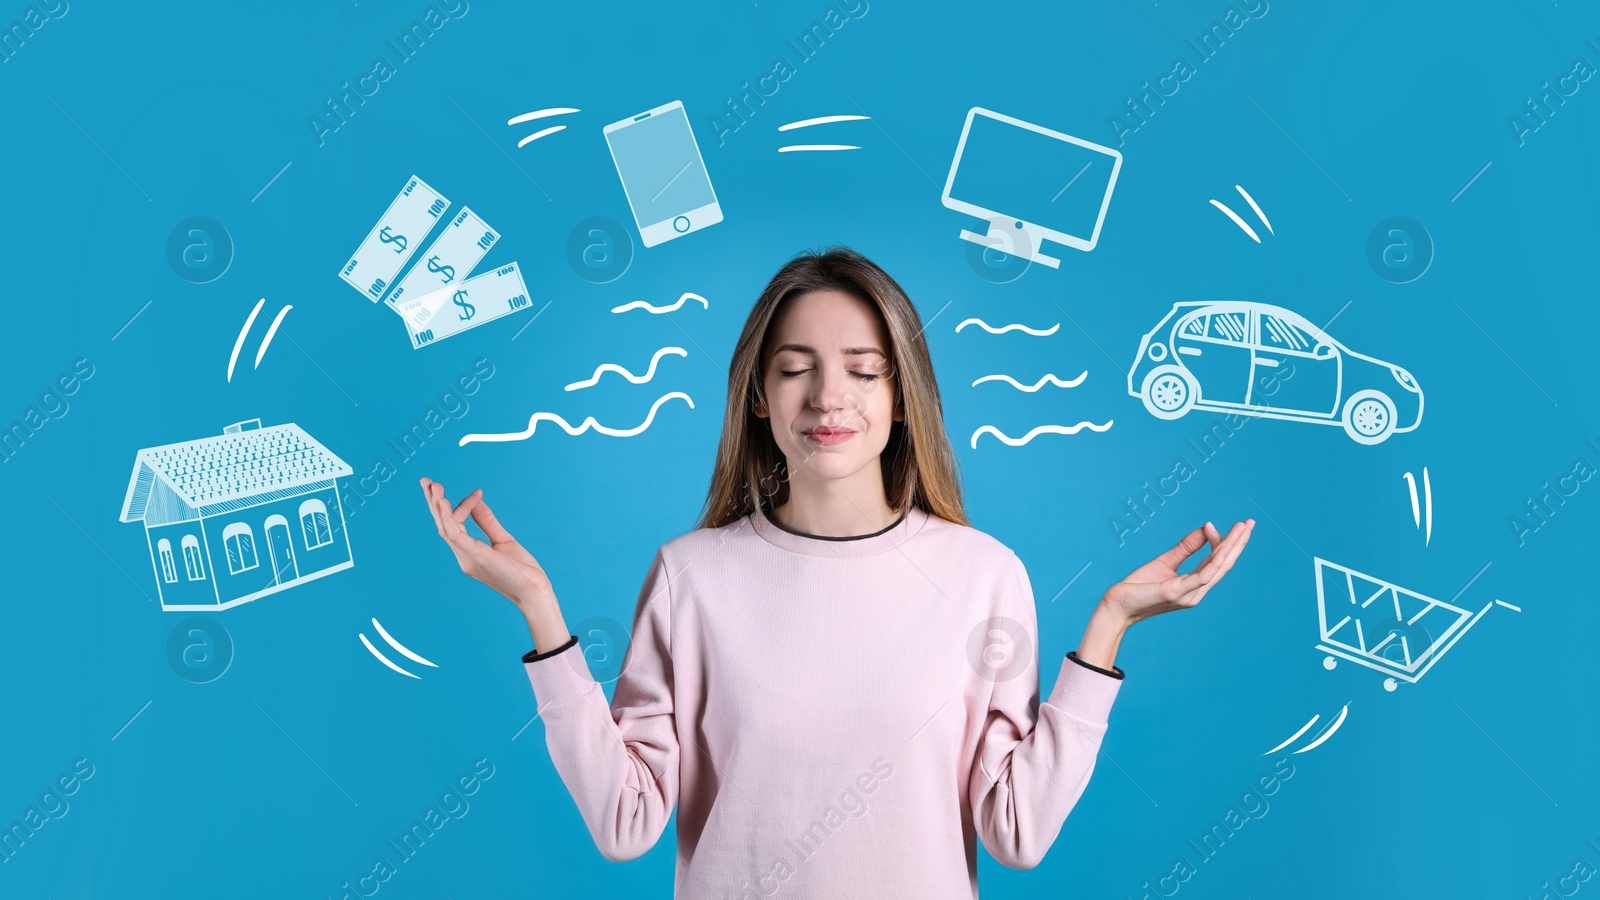 Image of Calm happy woman and illustration of different tasks around her on blue background. Balance in life  